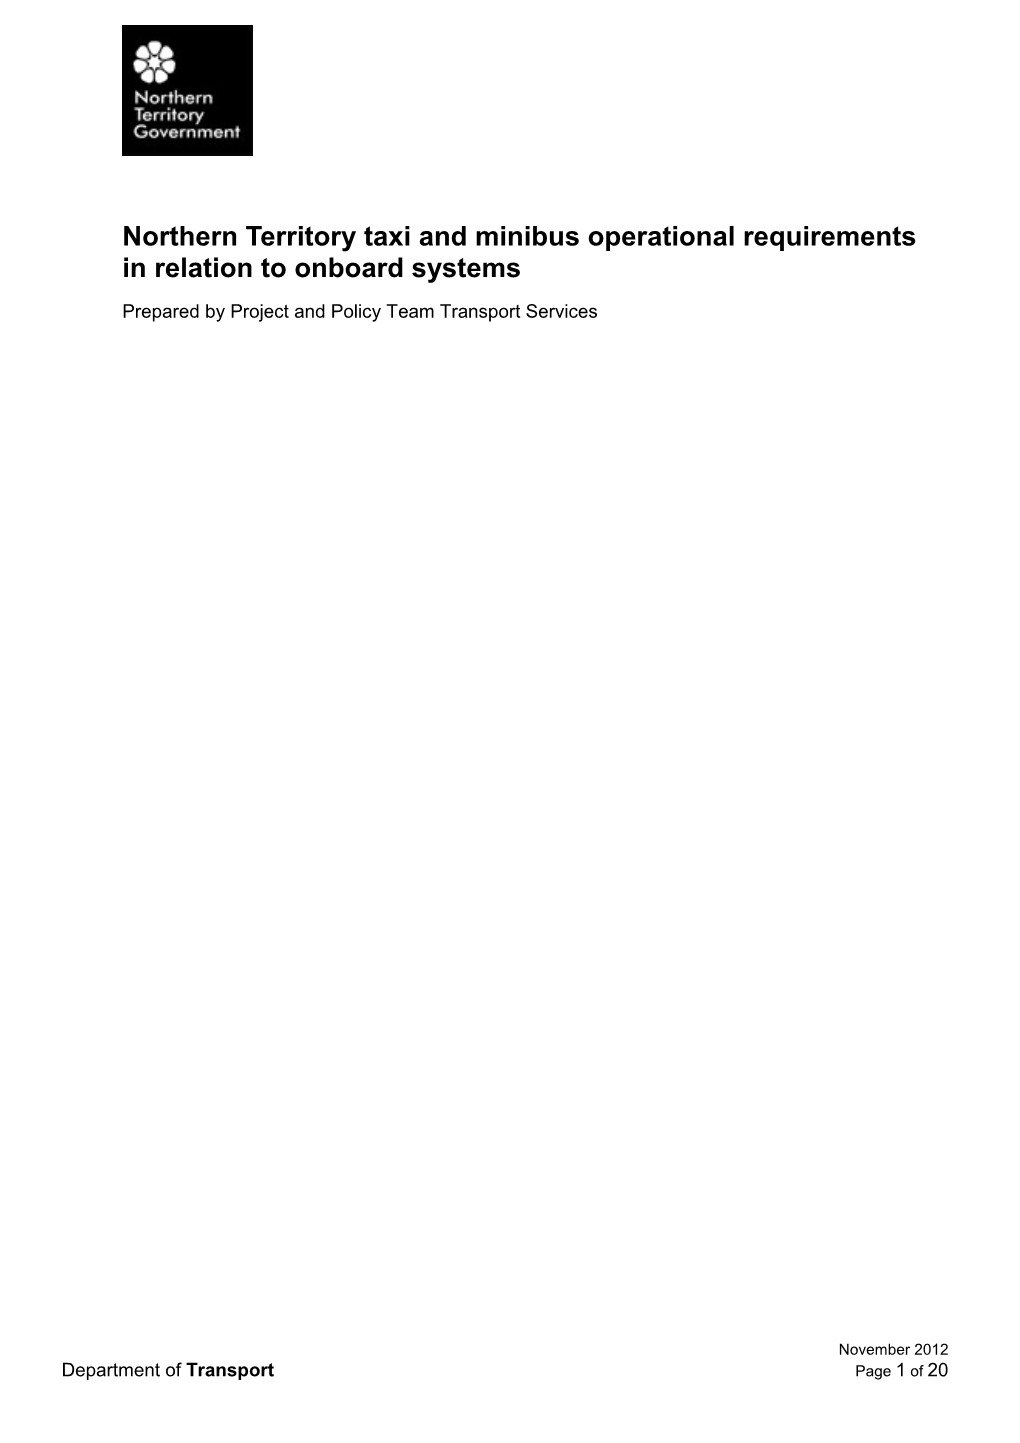 Northern Territory Taxi and Minibus Operational Requirements in Relation to Onboard Systems